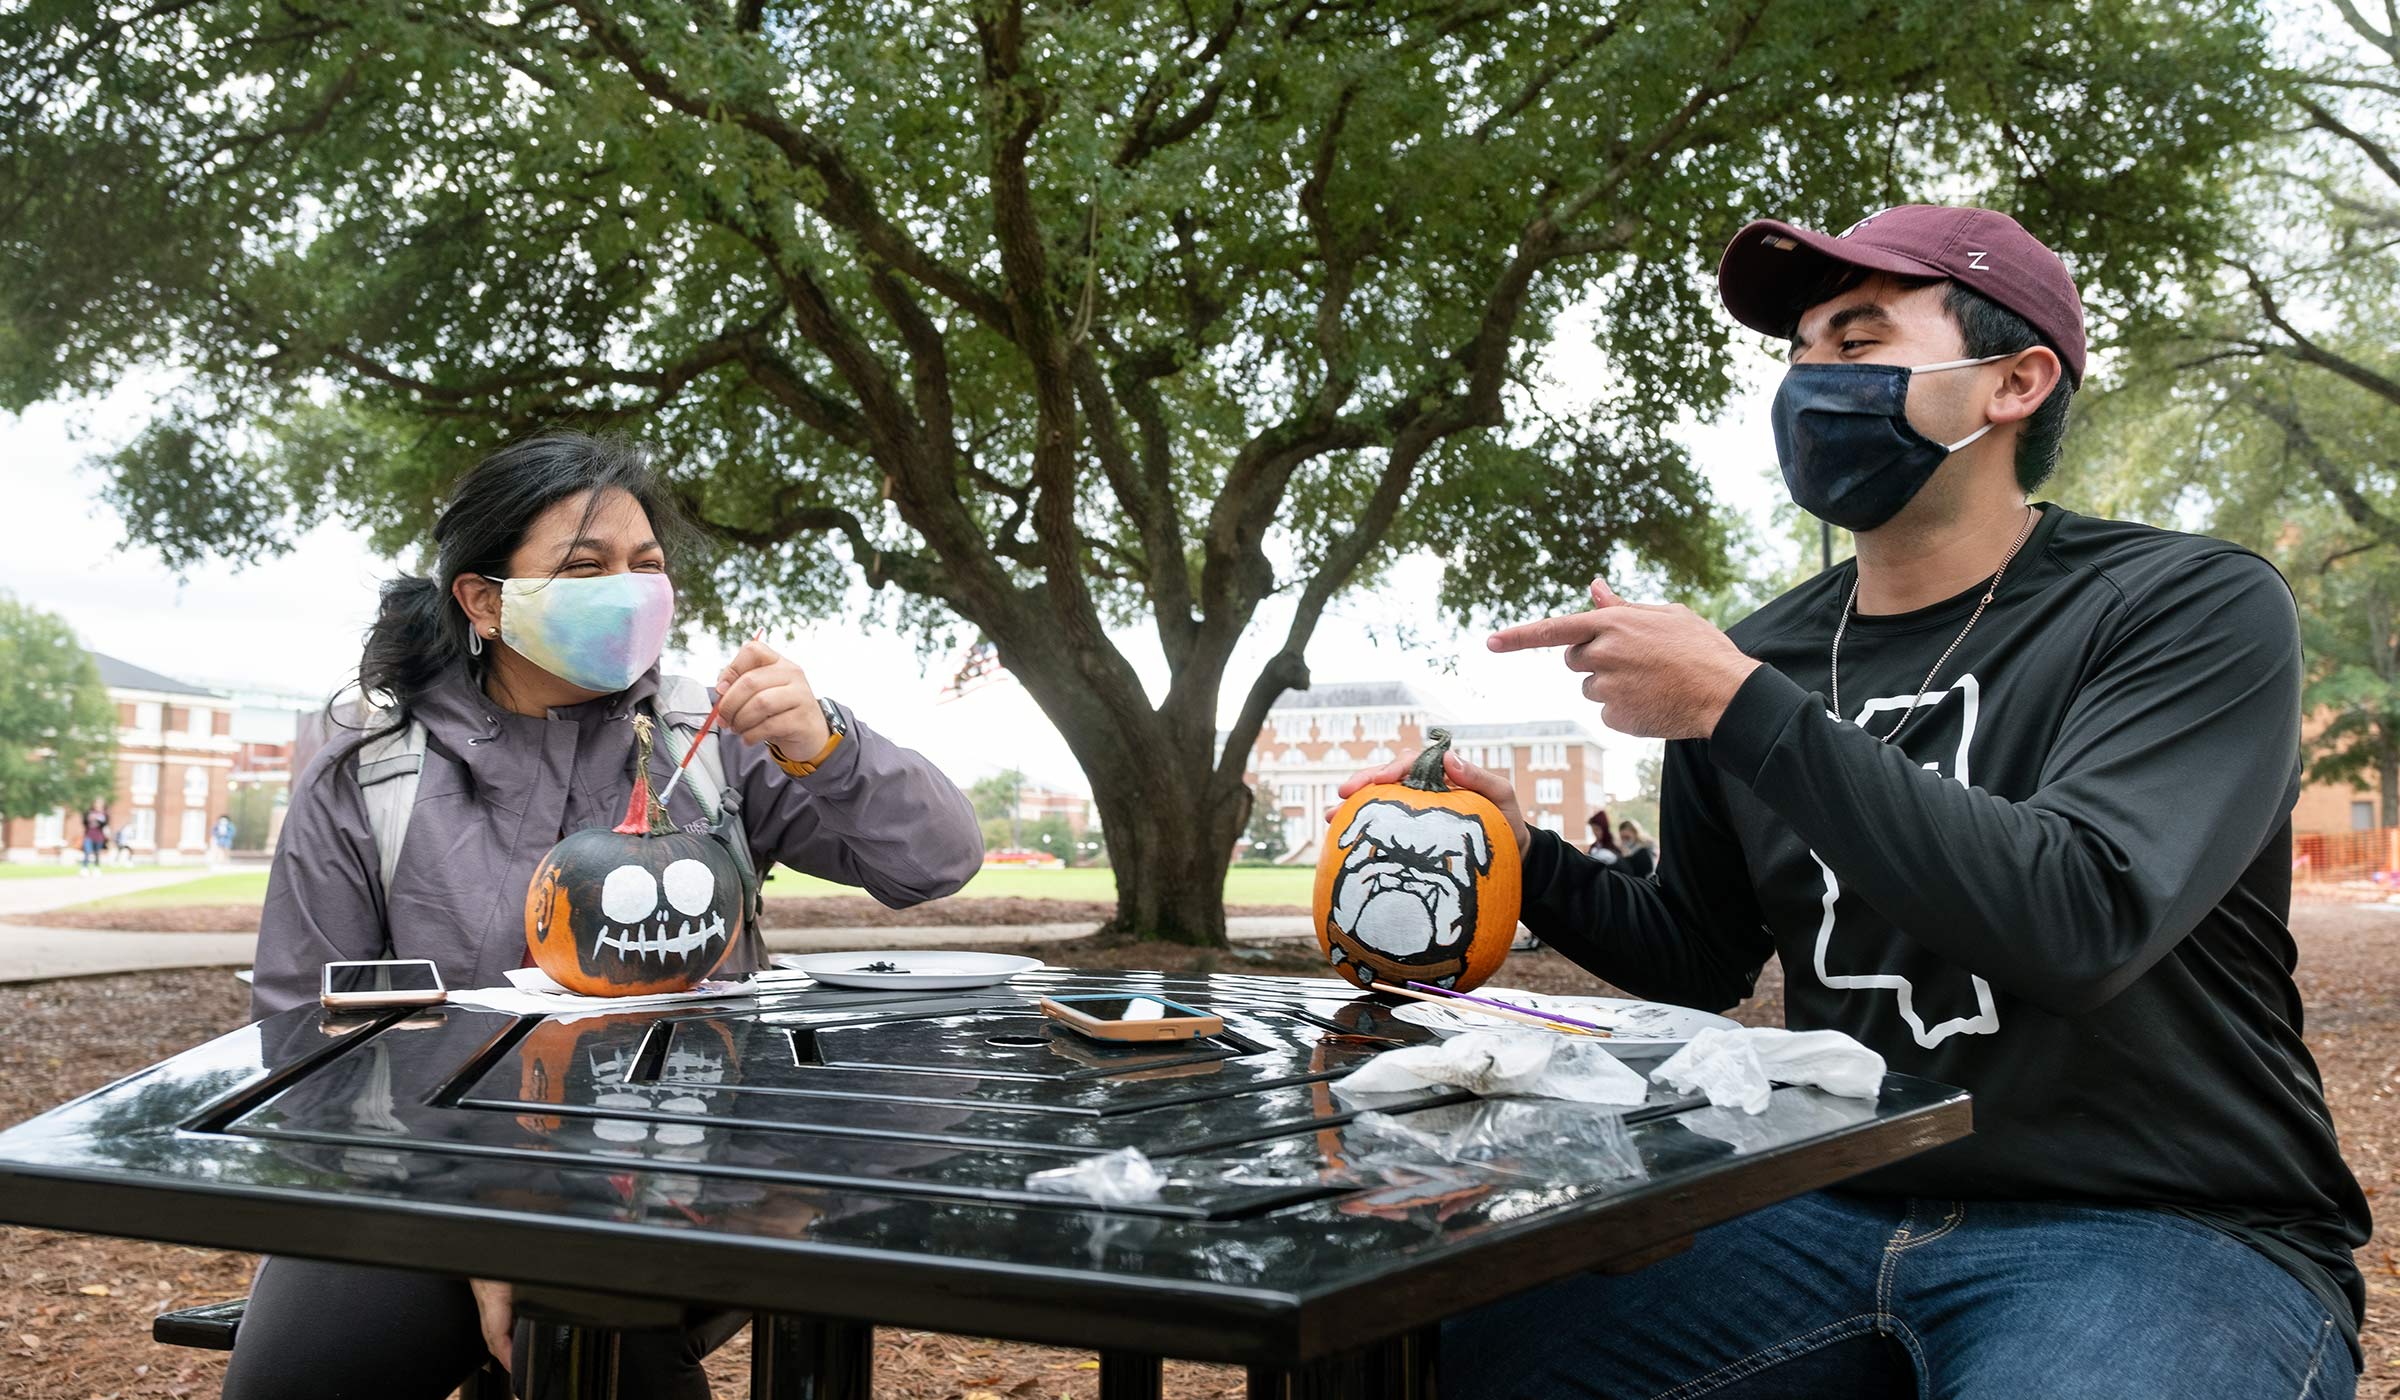 Two students paint Halloween pumpkins at one of the picnic tables placed in the Drill Field near Colvard Union.